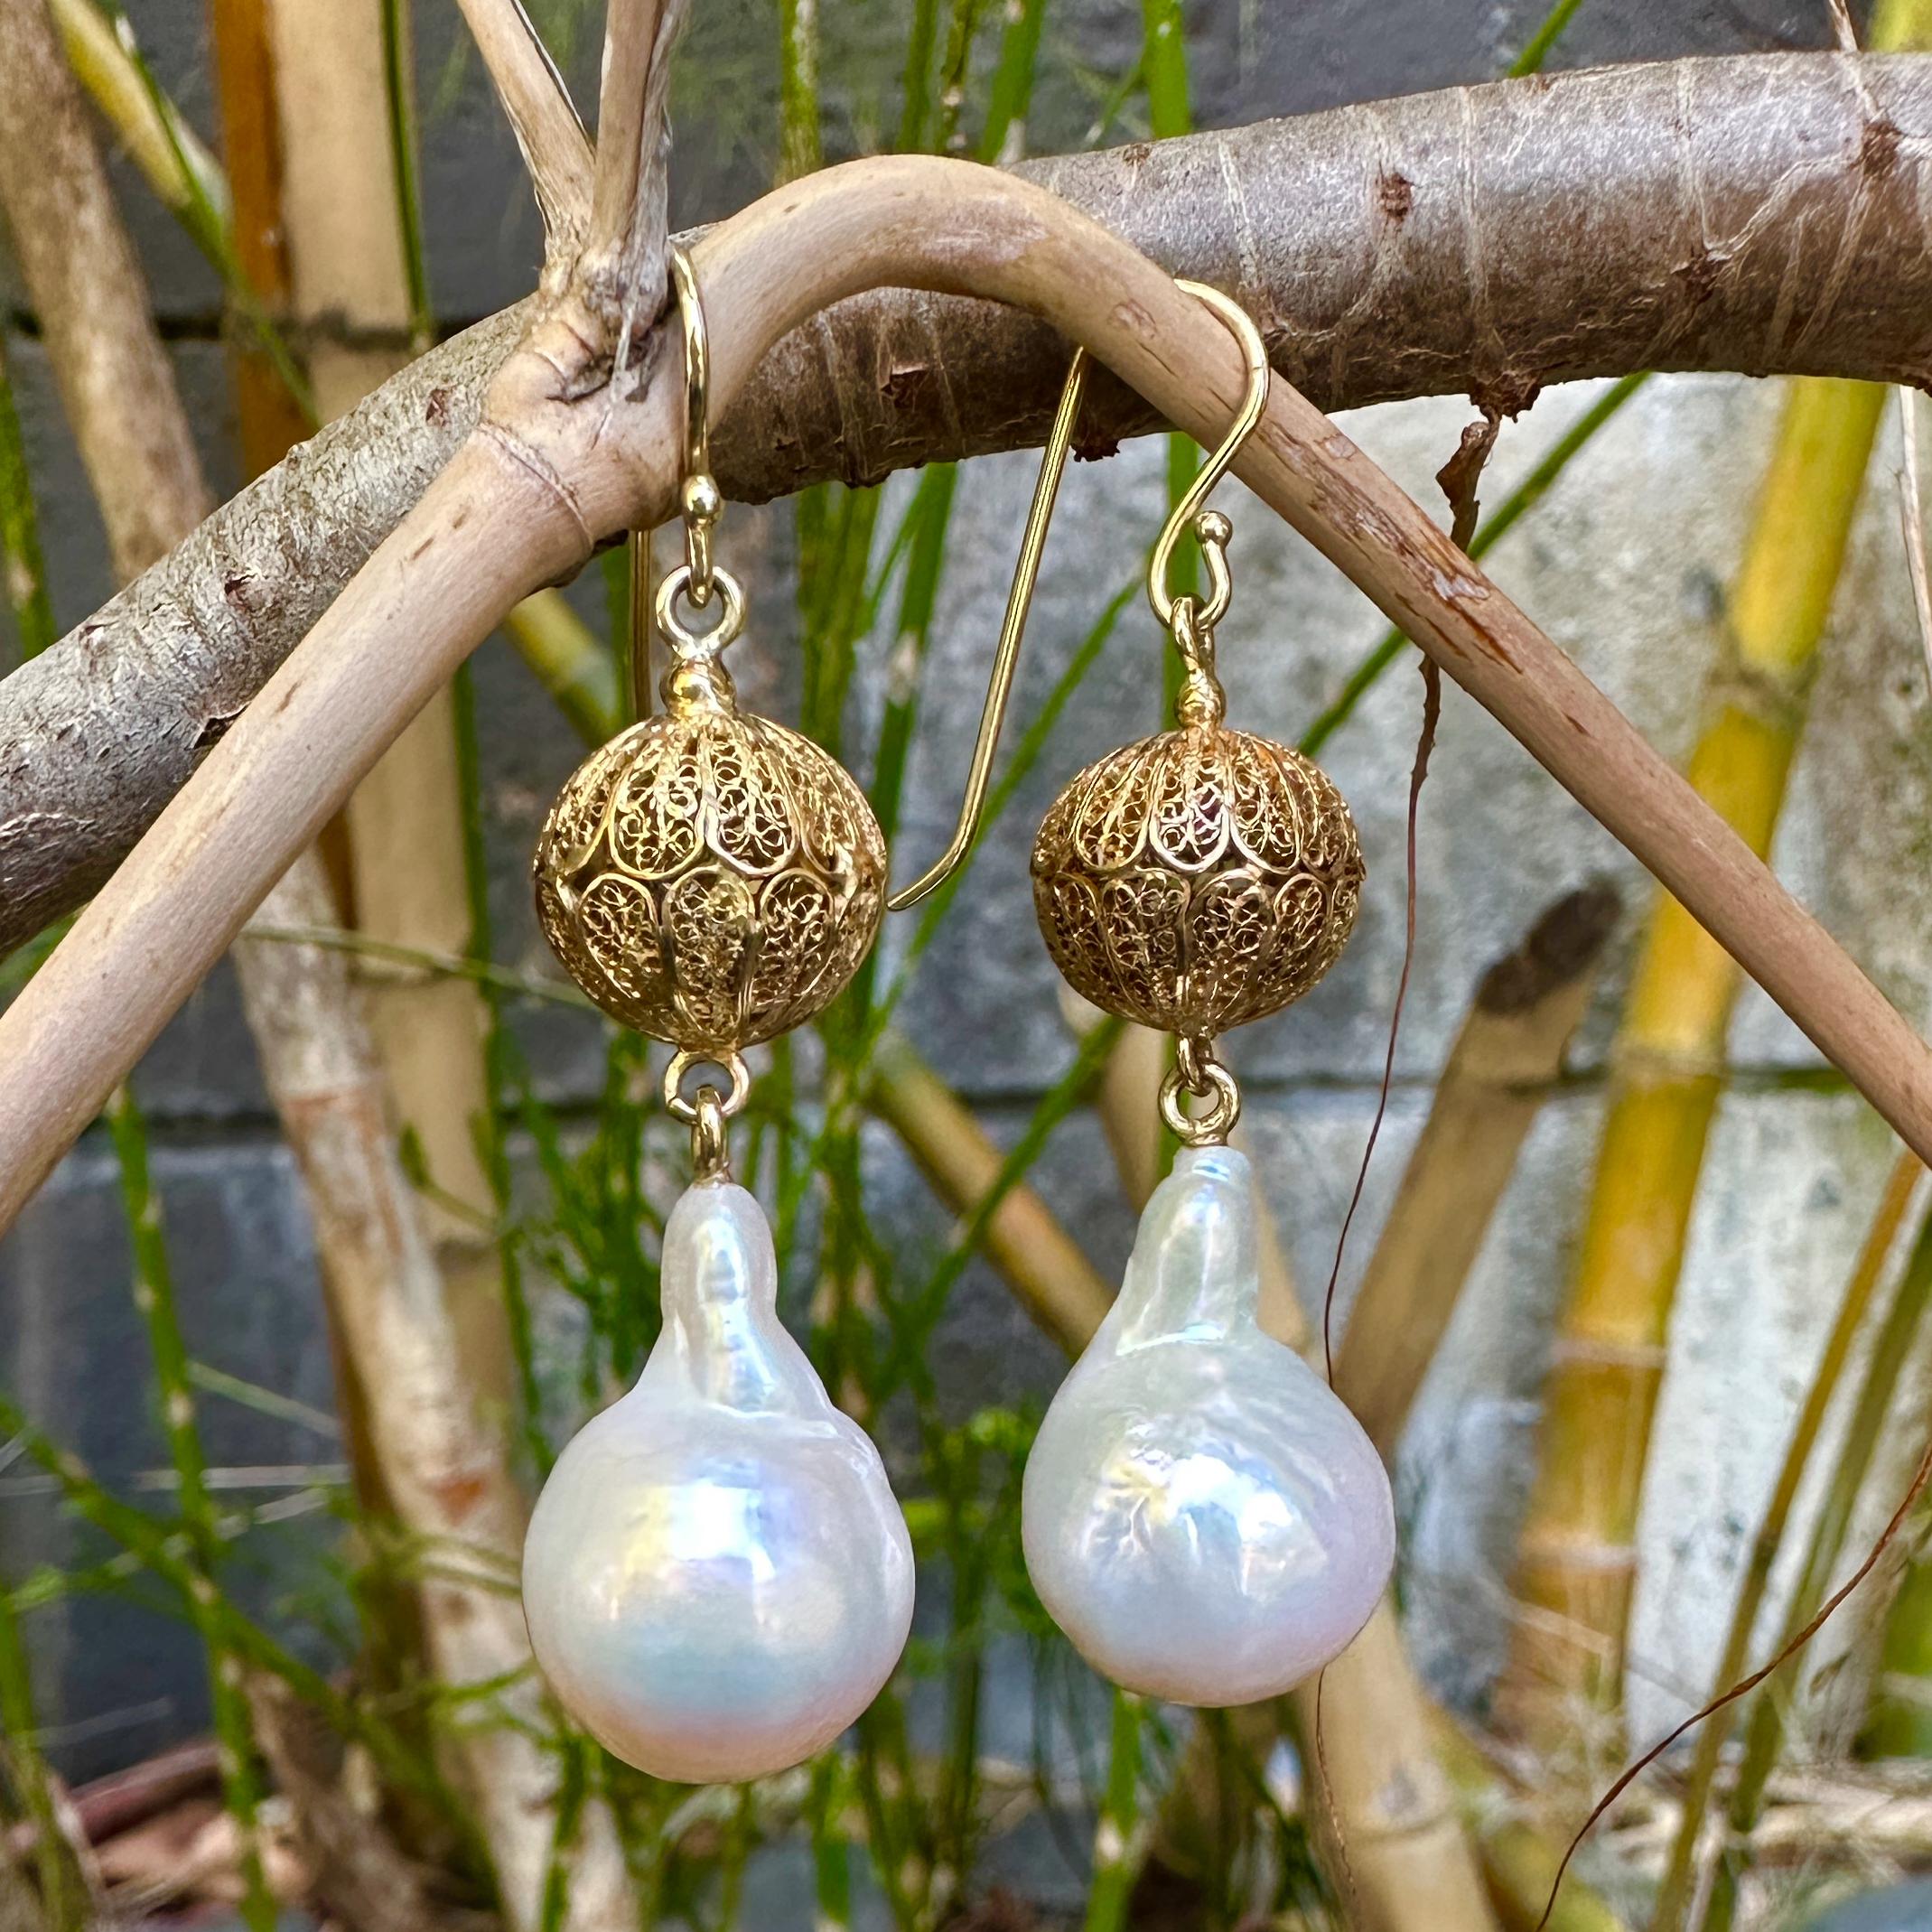 Dangle Wire Hook Earrings with Baroque Freshwater Pearls and 22K Gold Beads In New Condition For Sale In Sherman Oaks, CA